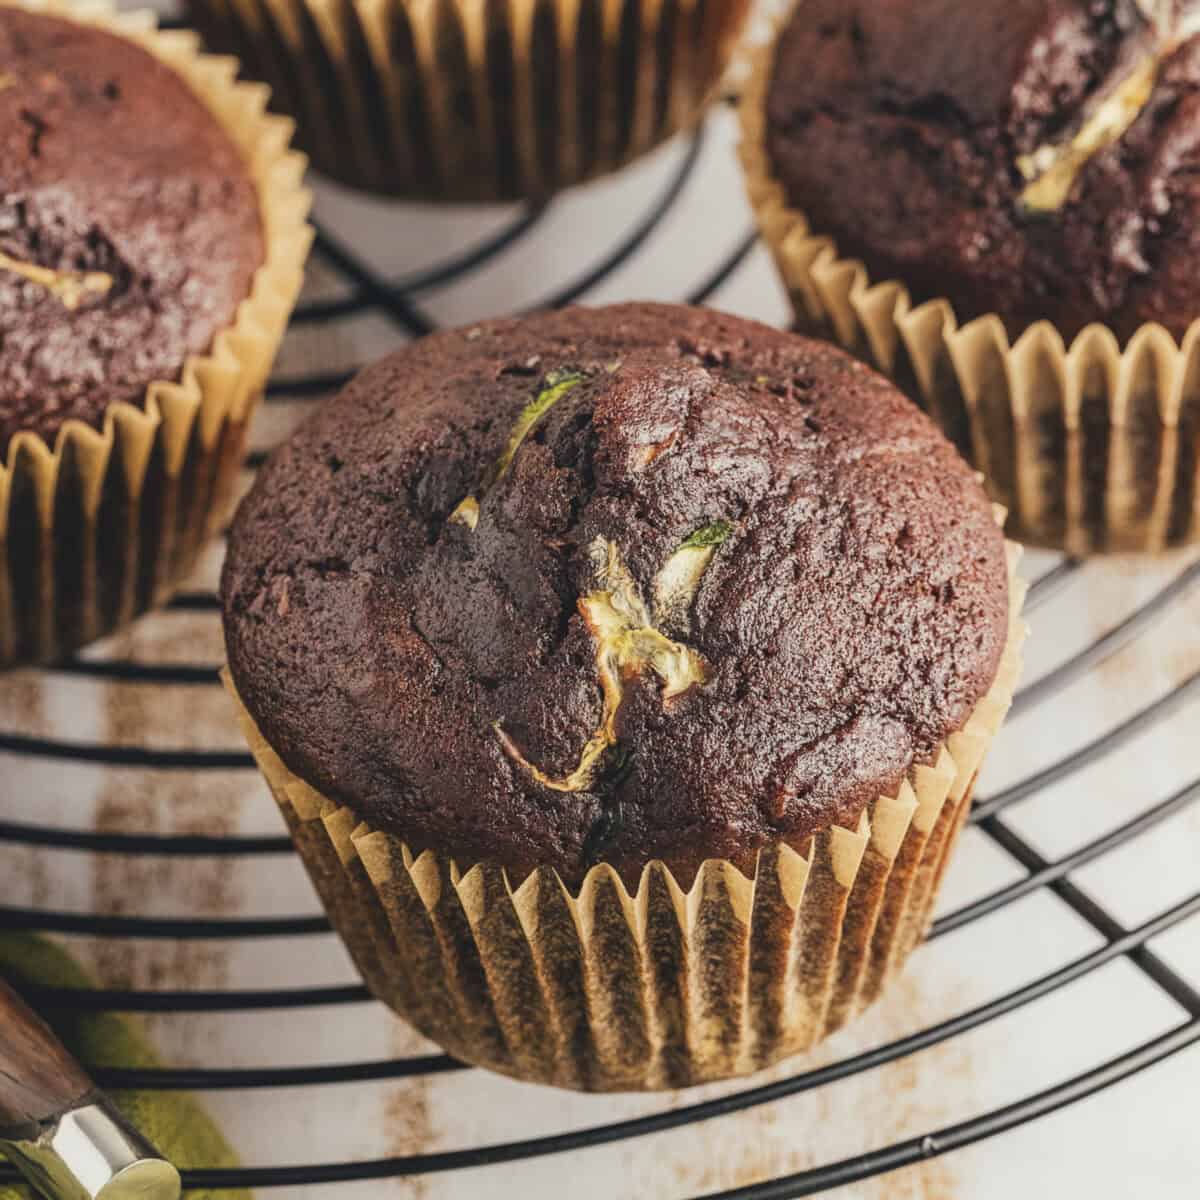 One chocolate zucchini muffin in a muffin wrapper on a cooling rack with three muffins arranged behind it.